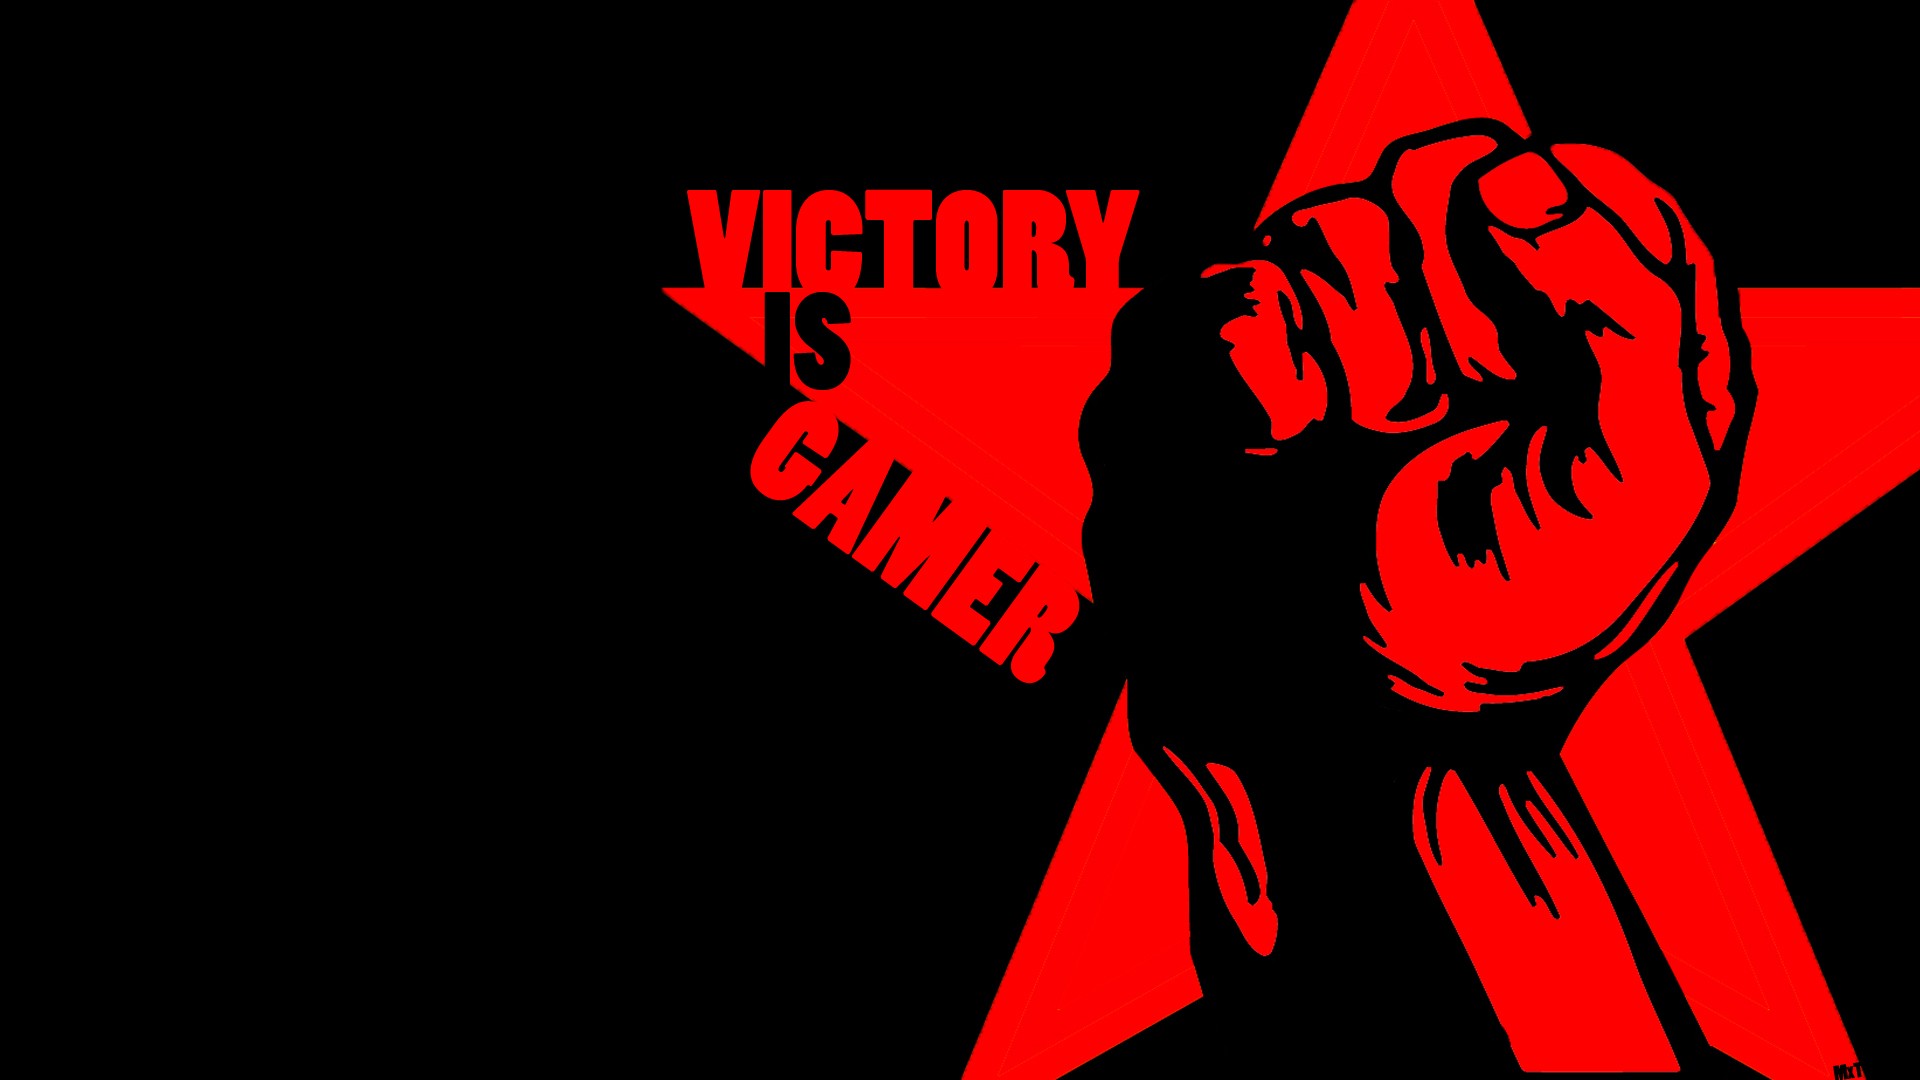 Simple Background Video Games Artwork Typography Fists Red 1920x1080